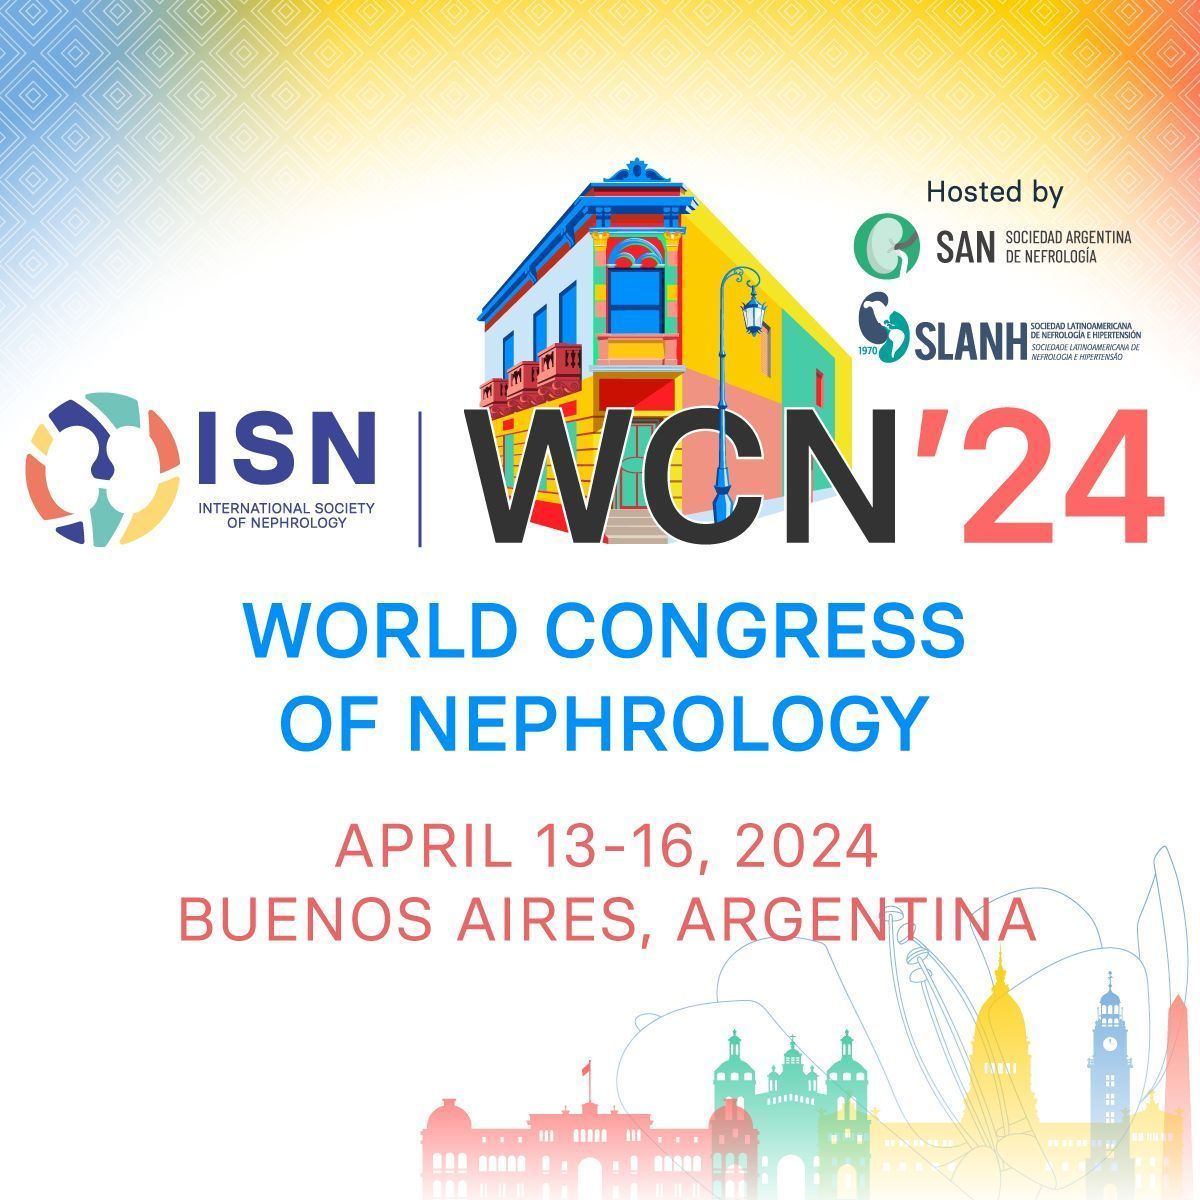 Day 3 of #ISNWCN will wrap up with the announcement of the winners of the ISN Commnity Best Film and the World Kidney Day Best Film. #nephrology #kidney @ISNWCN